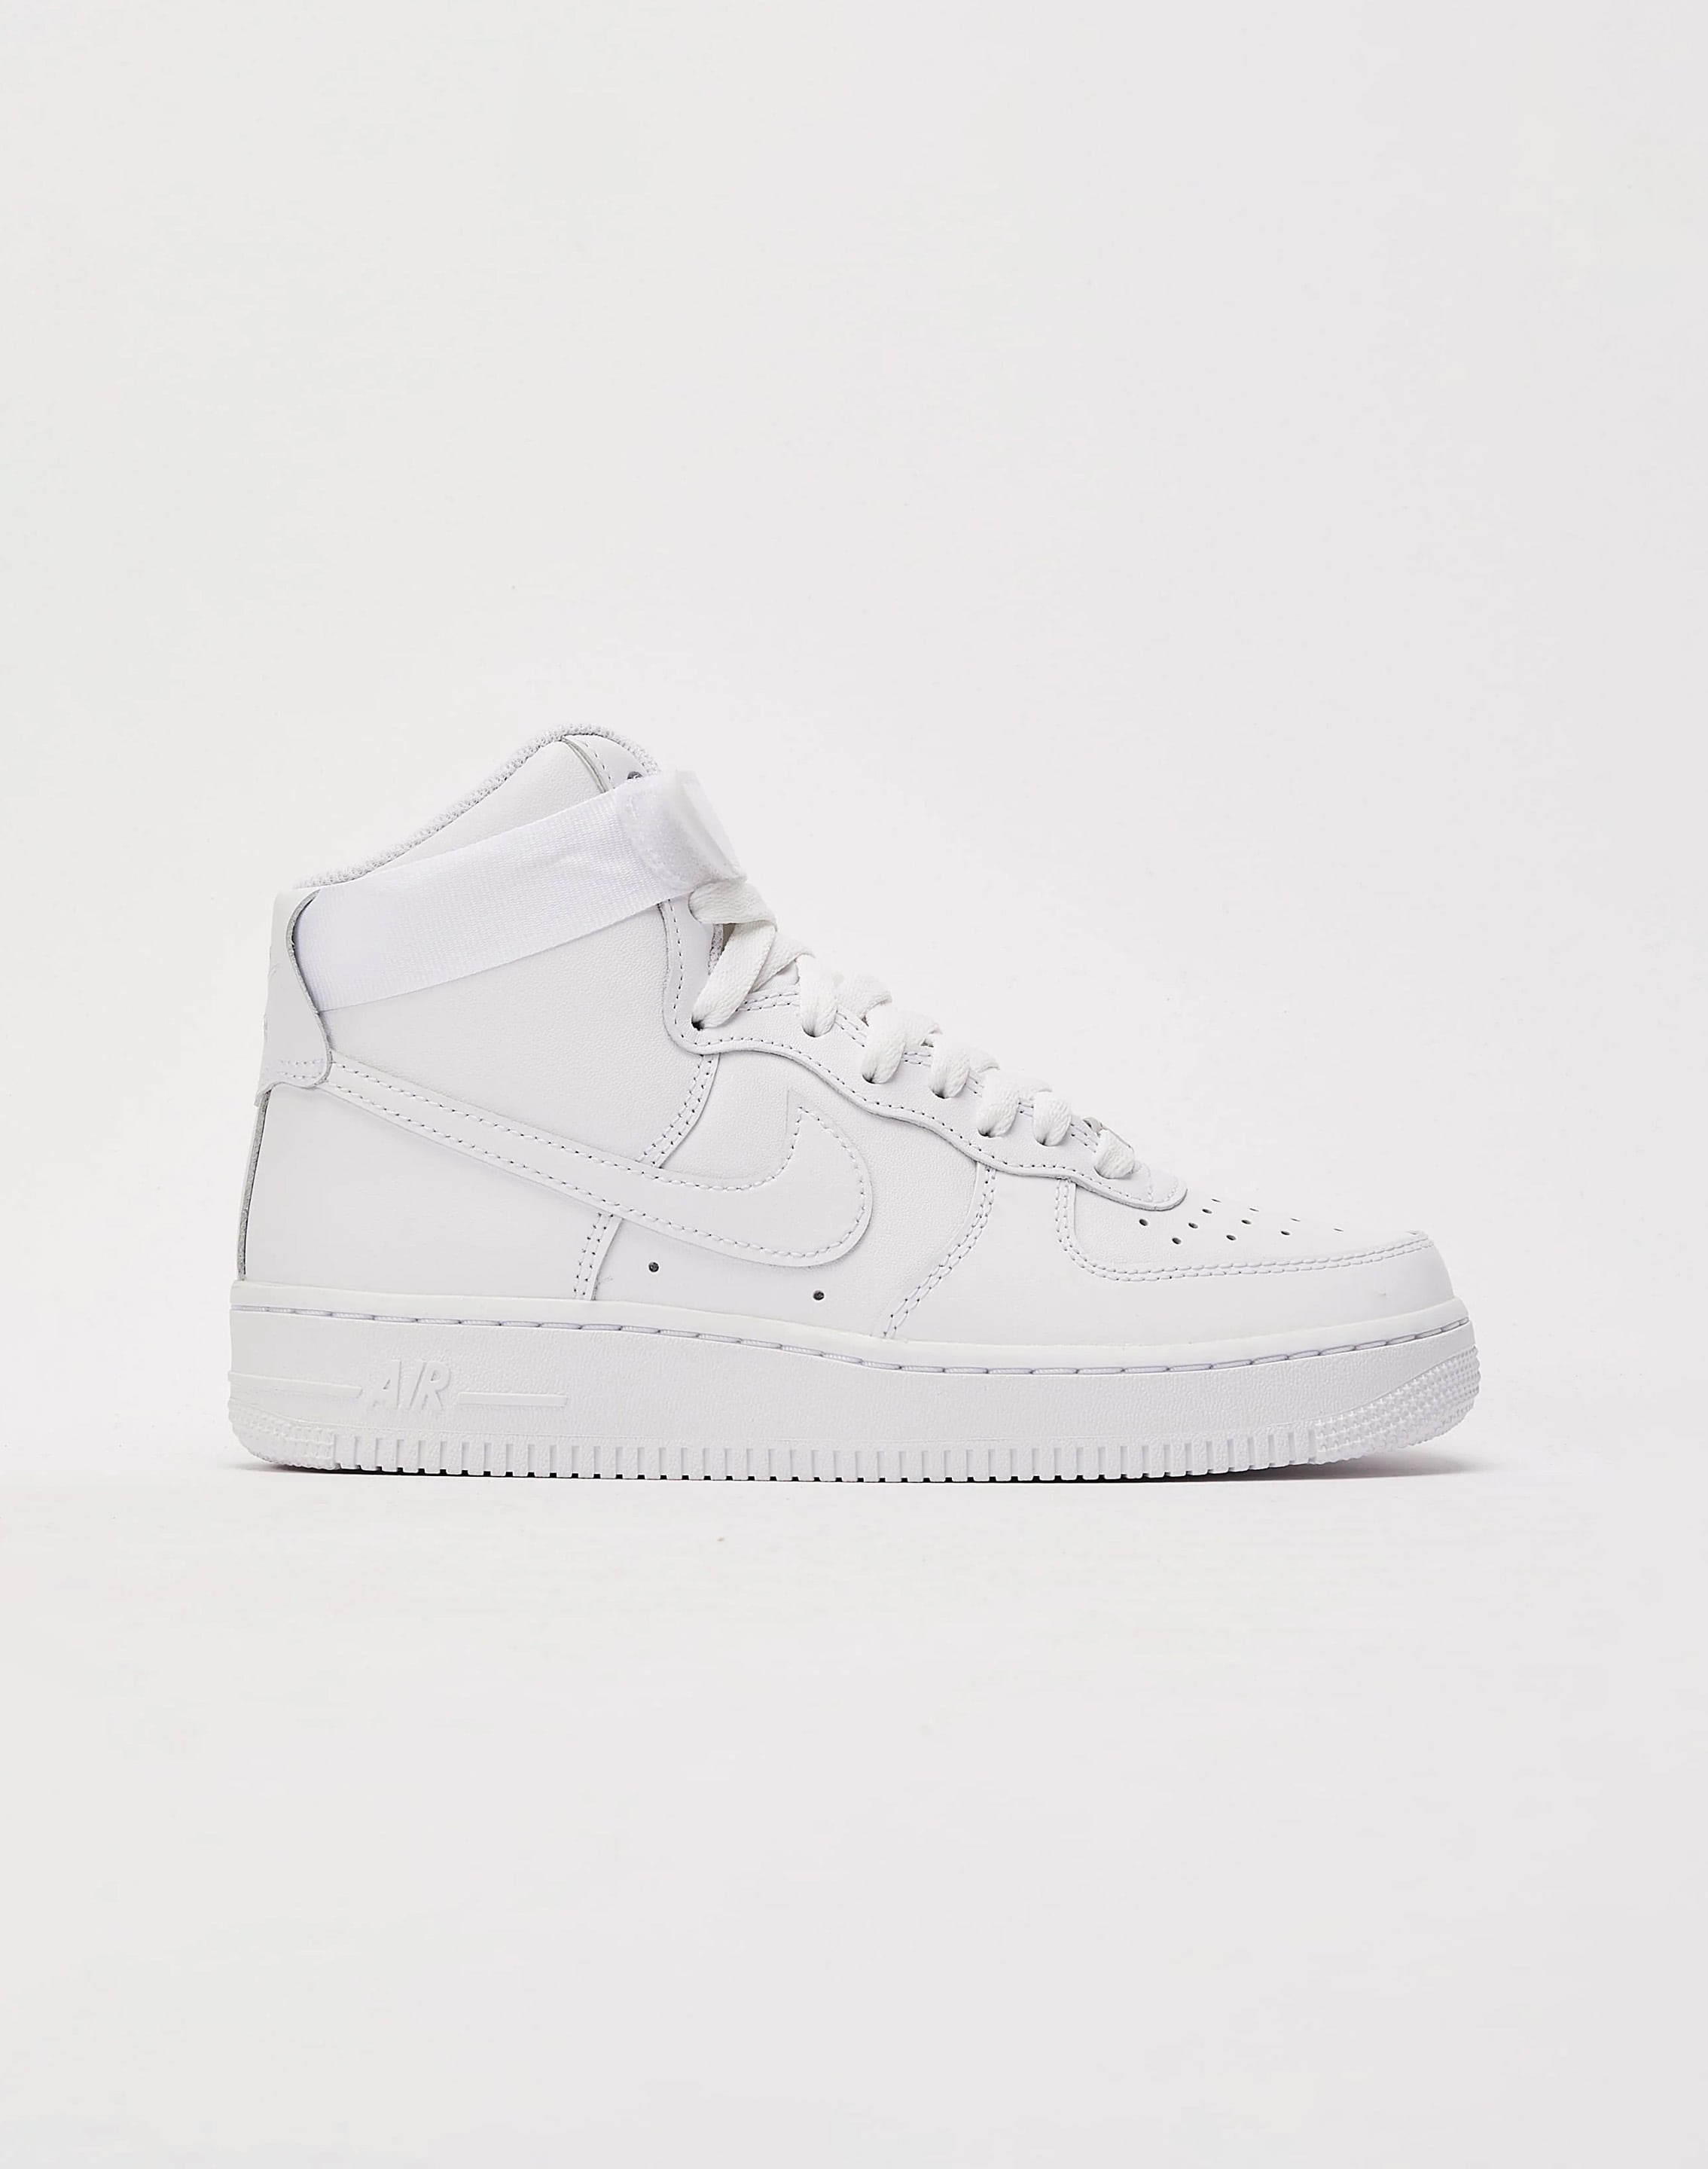 Nike Air Force 1 High – DTLR